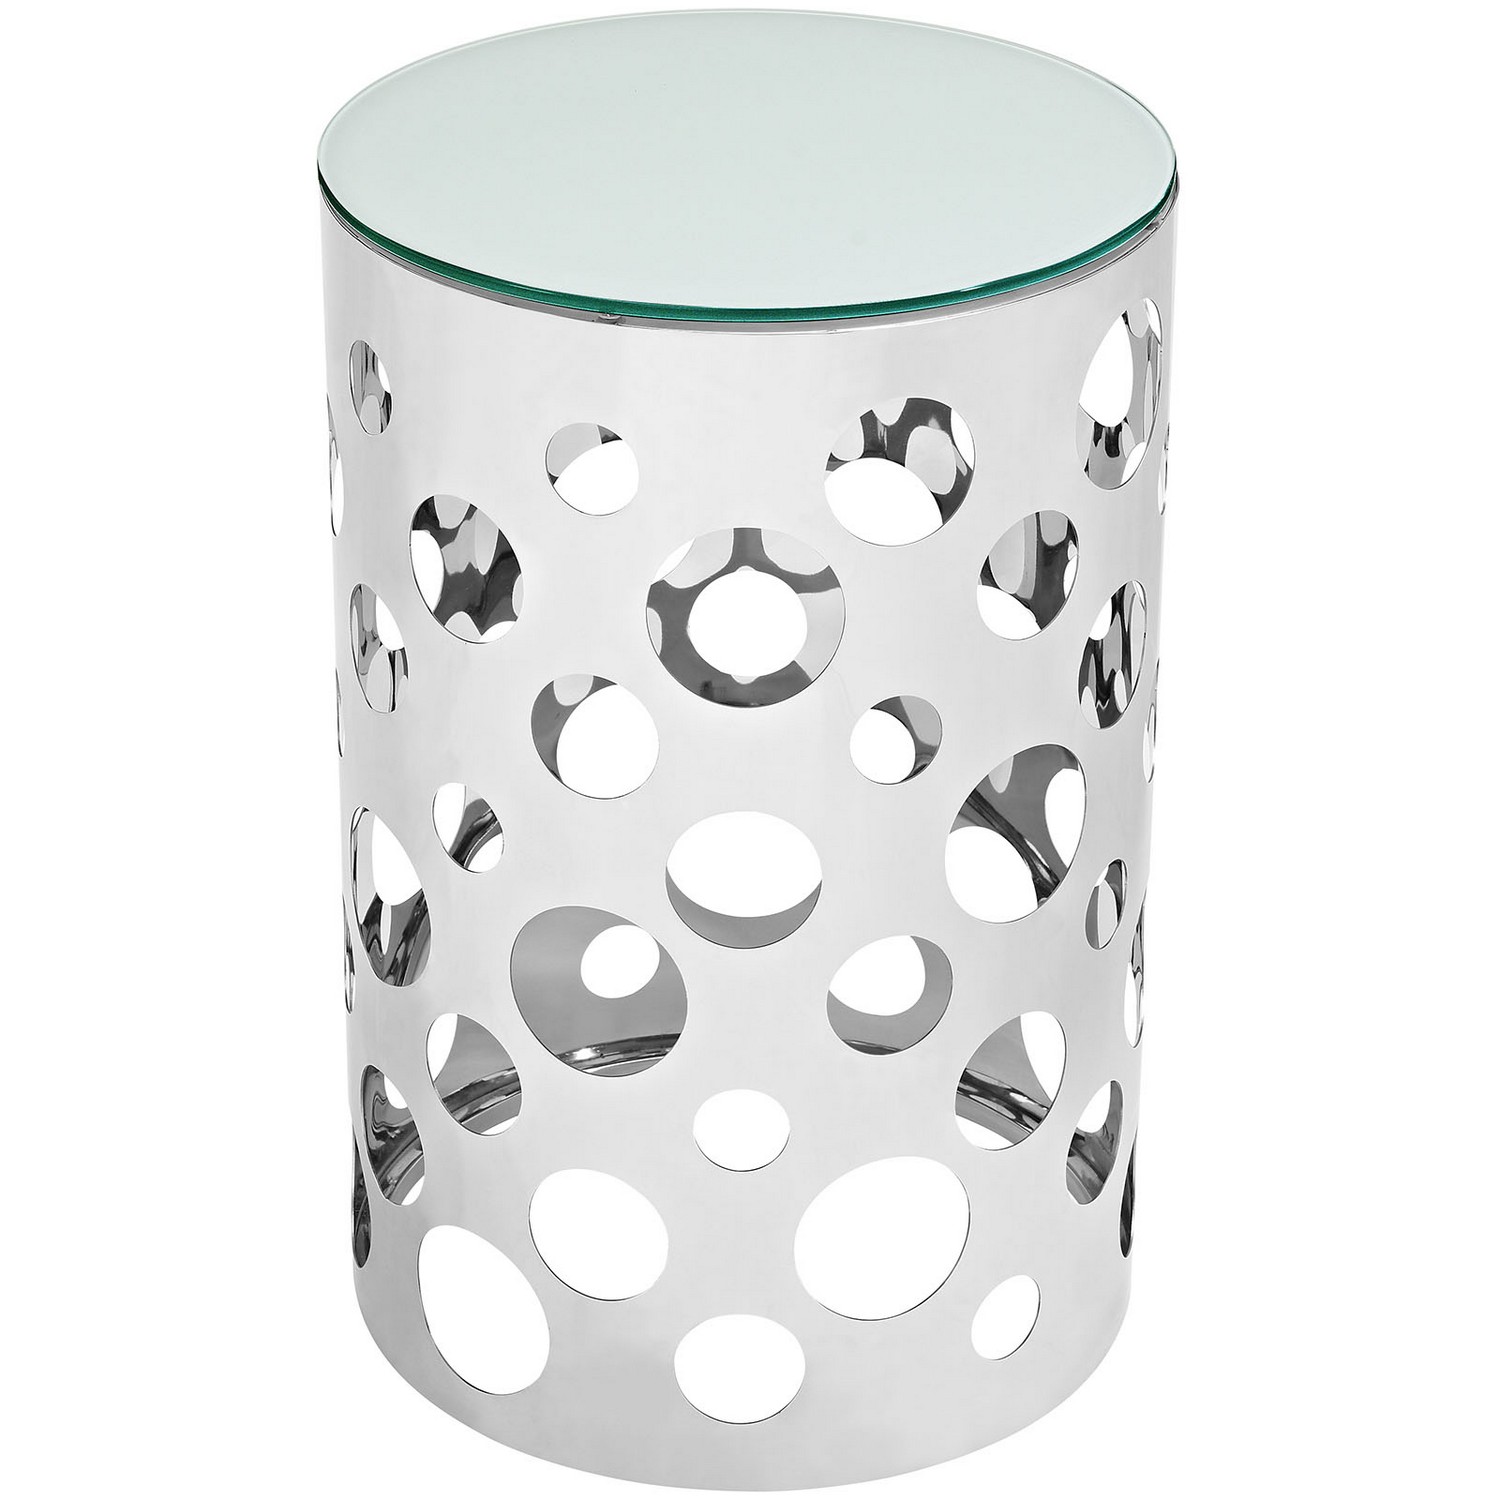 Modway Etch Stainless Steel Side Table - Silver